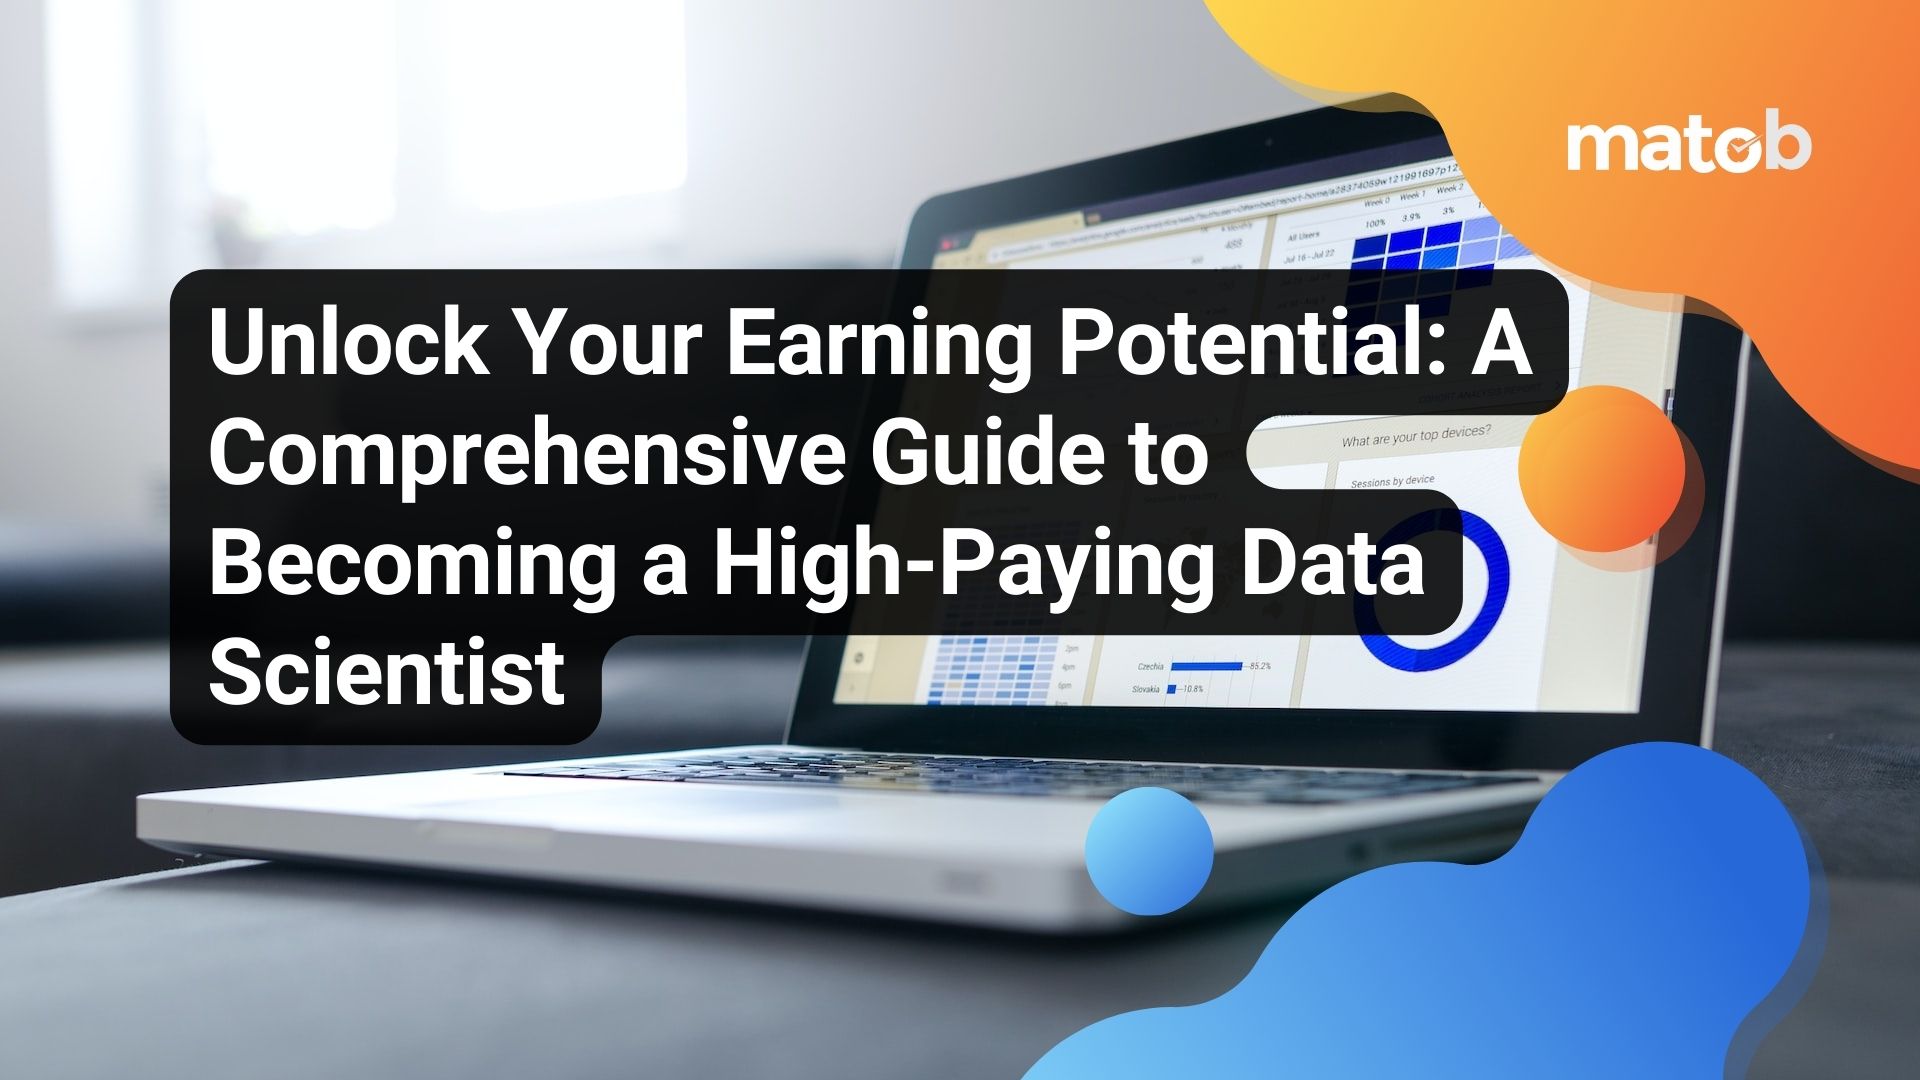 Unlock Your Earning Potential: A Comprehensive Guide to Becoming a High-Paying Data Scientist